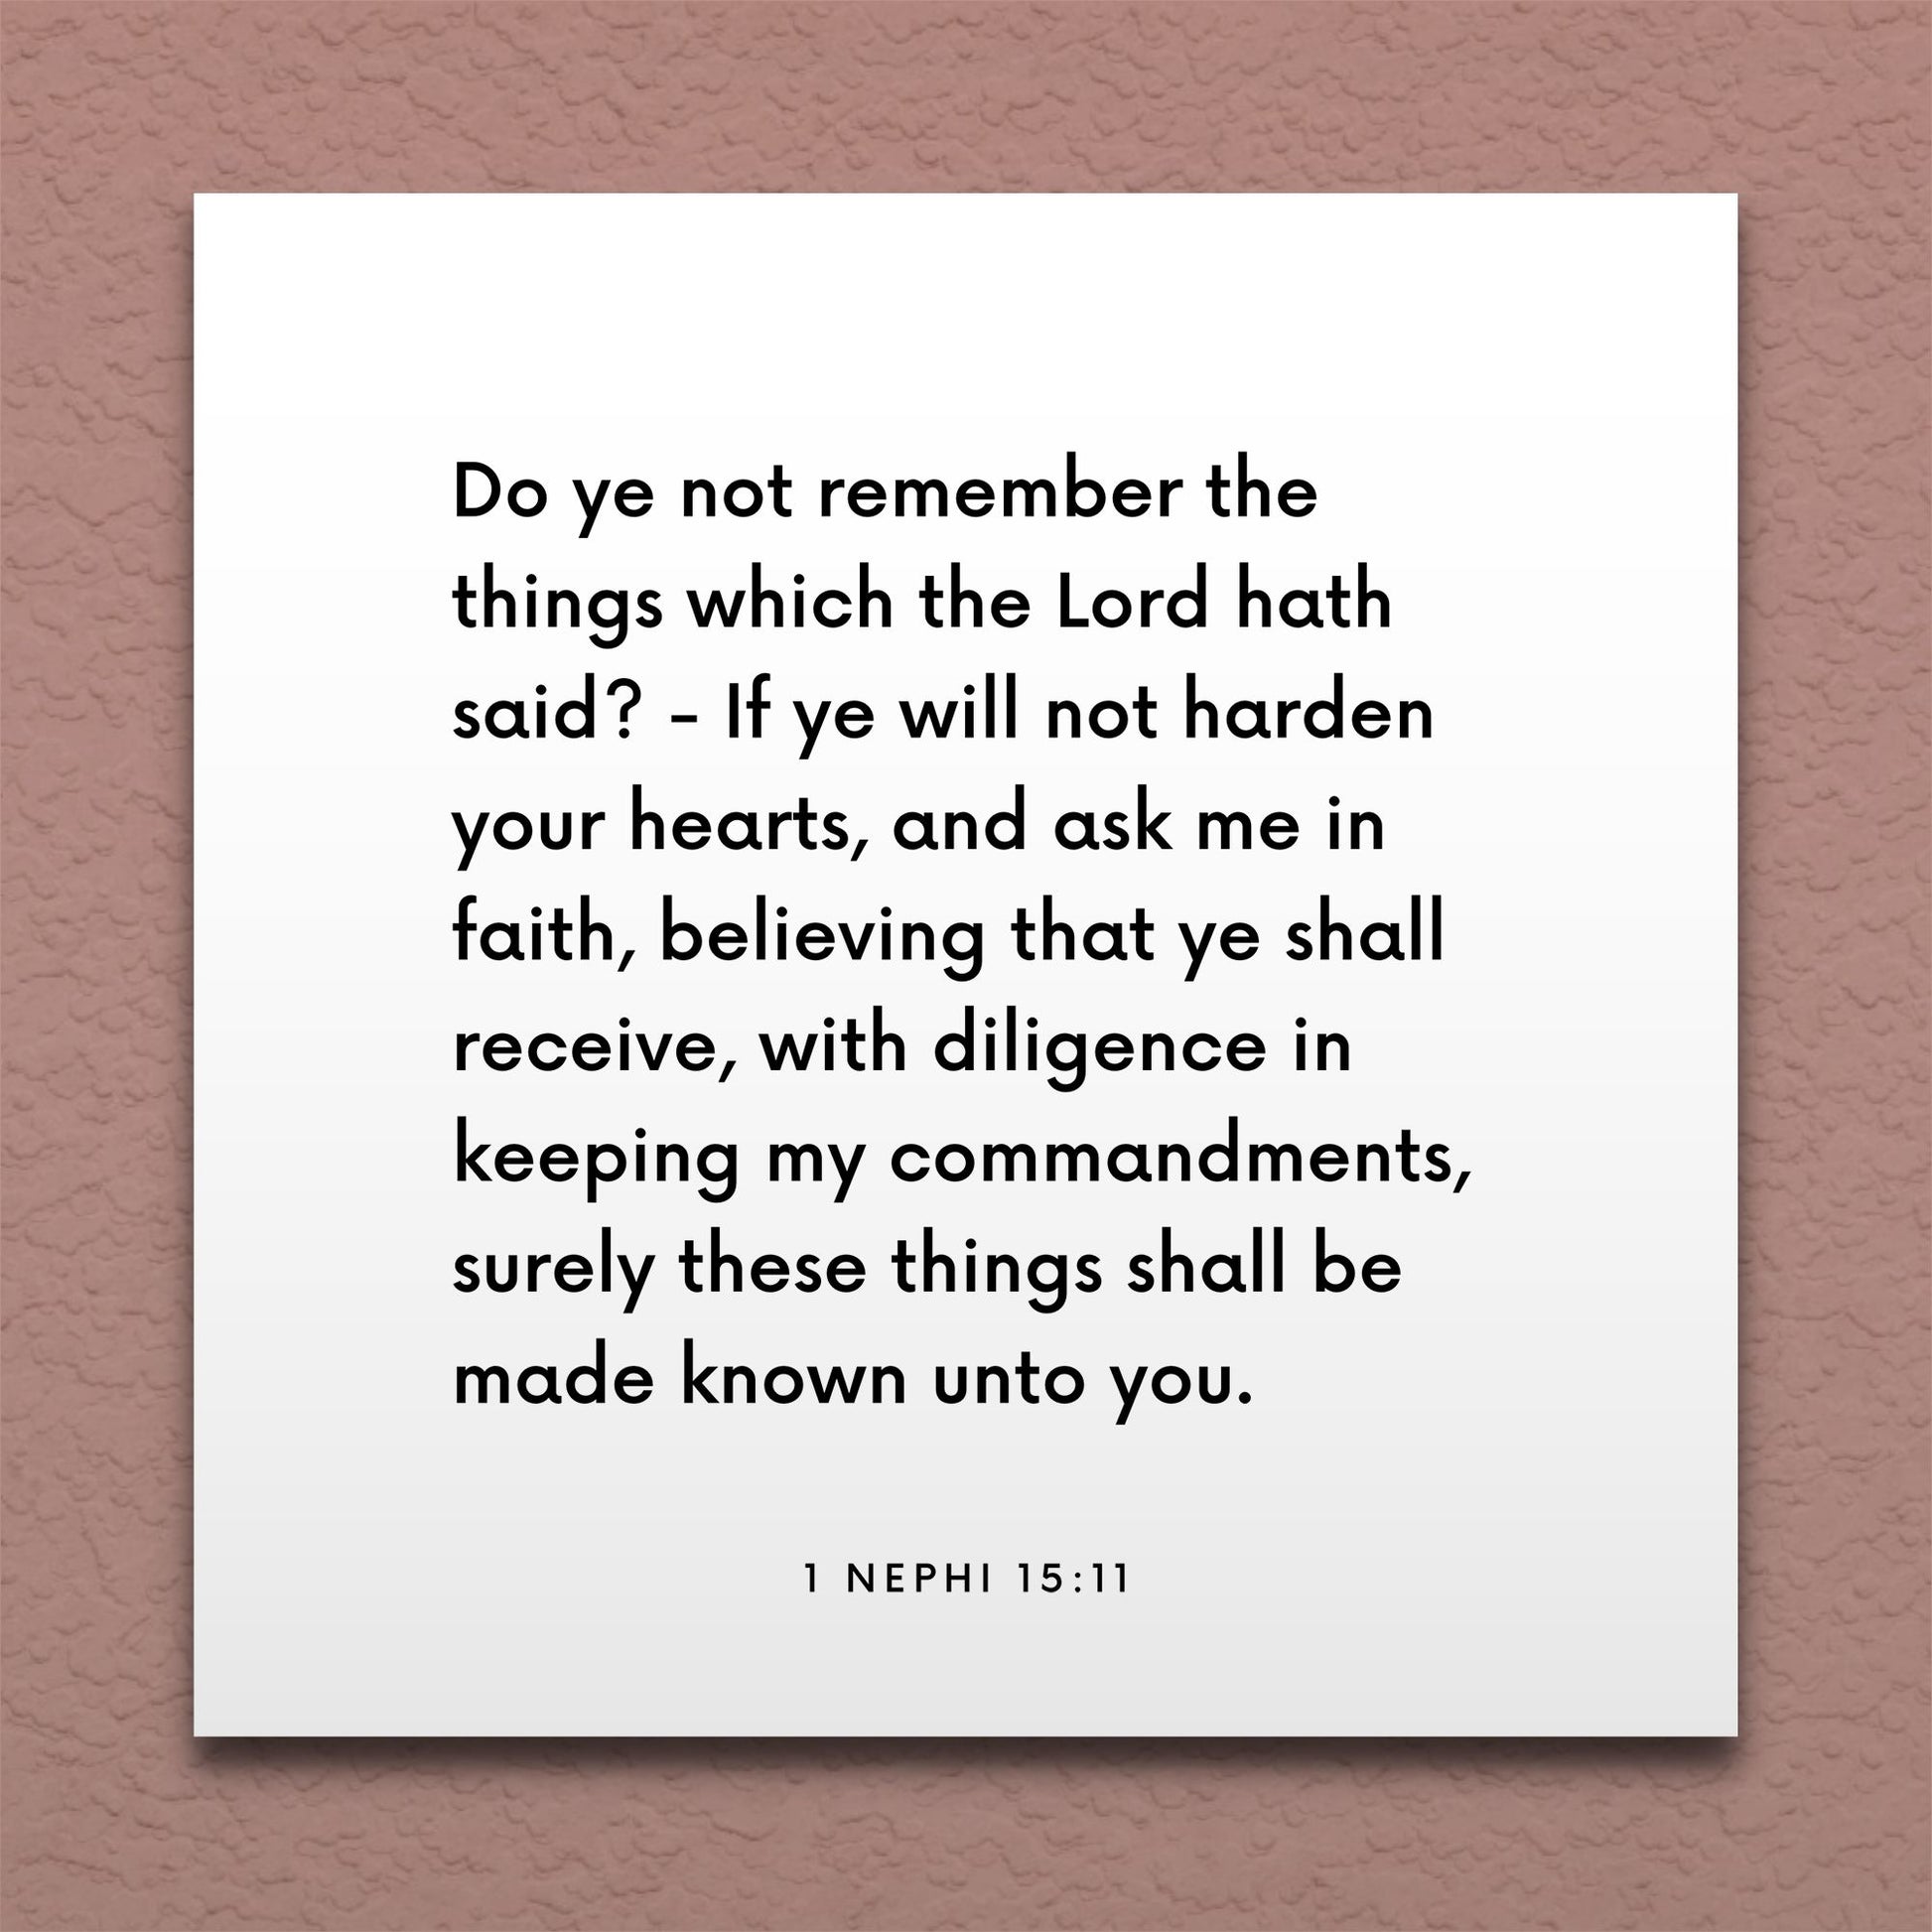 Wall-mounted scripture tile for 1 Nephi 15:11 - "Surely these things shall be made known unto you"